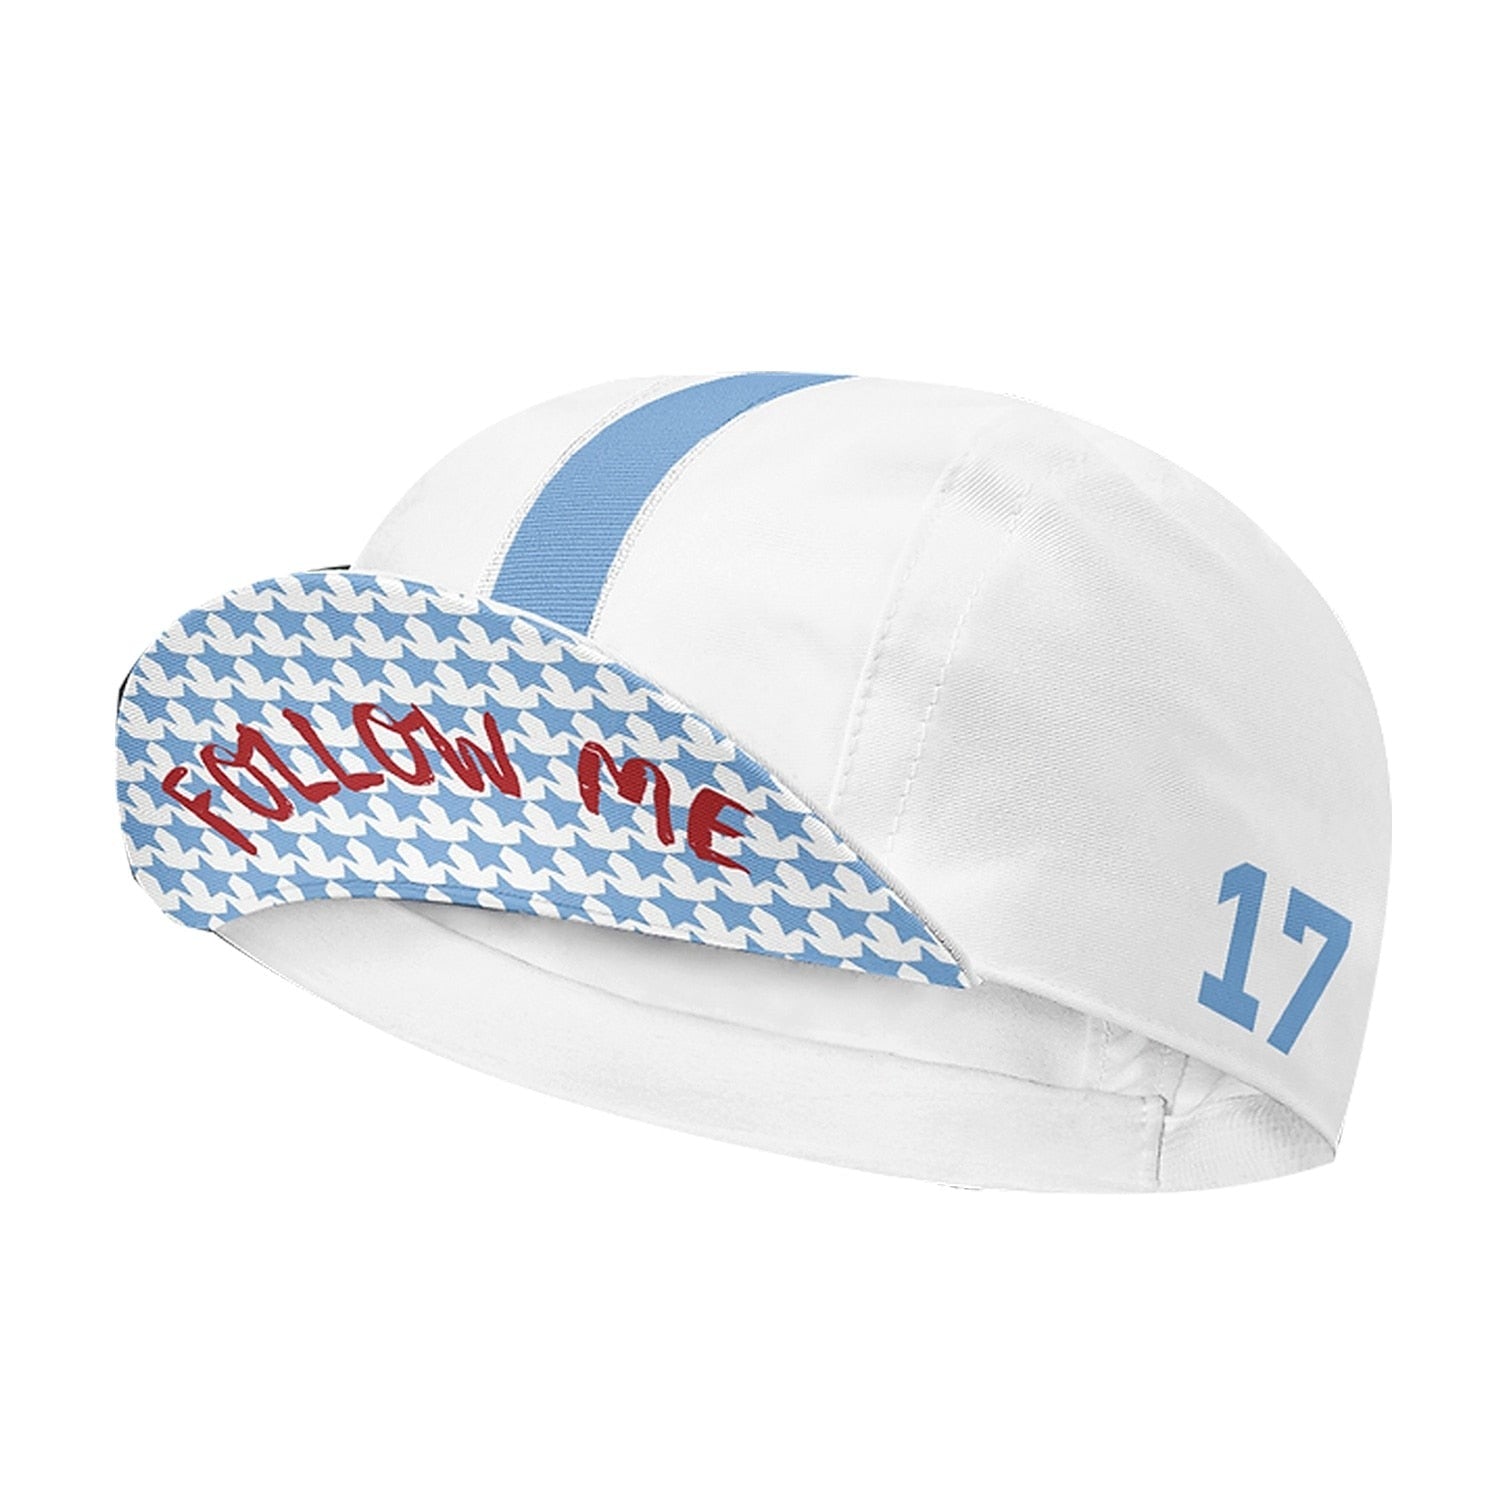 Follow Me 17 White Polyester Cycling Cap Outdoor Bicycle Sports For Quick Dry Balaclava Blue Star Breathable BIke Hats